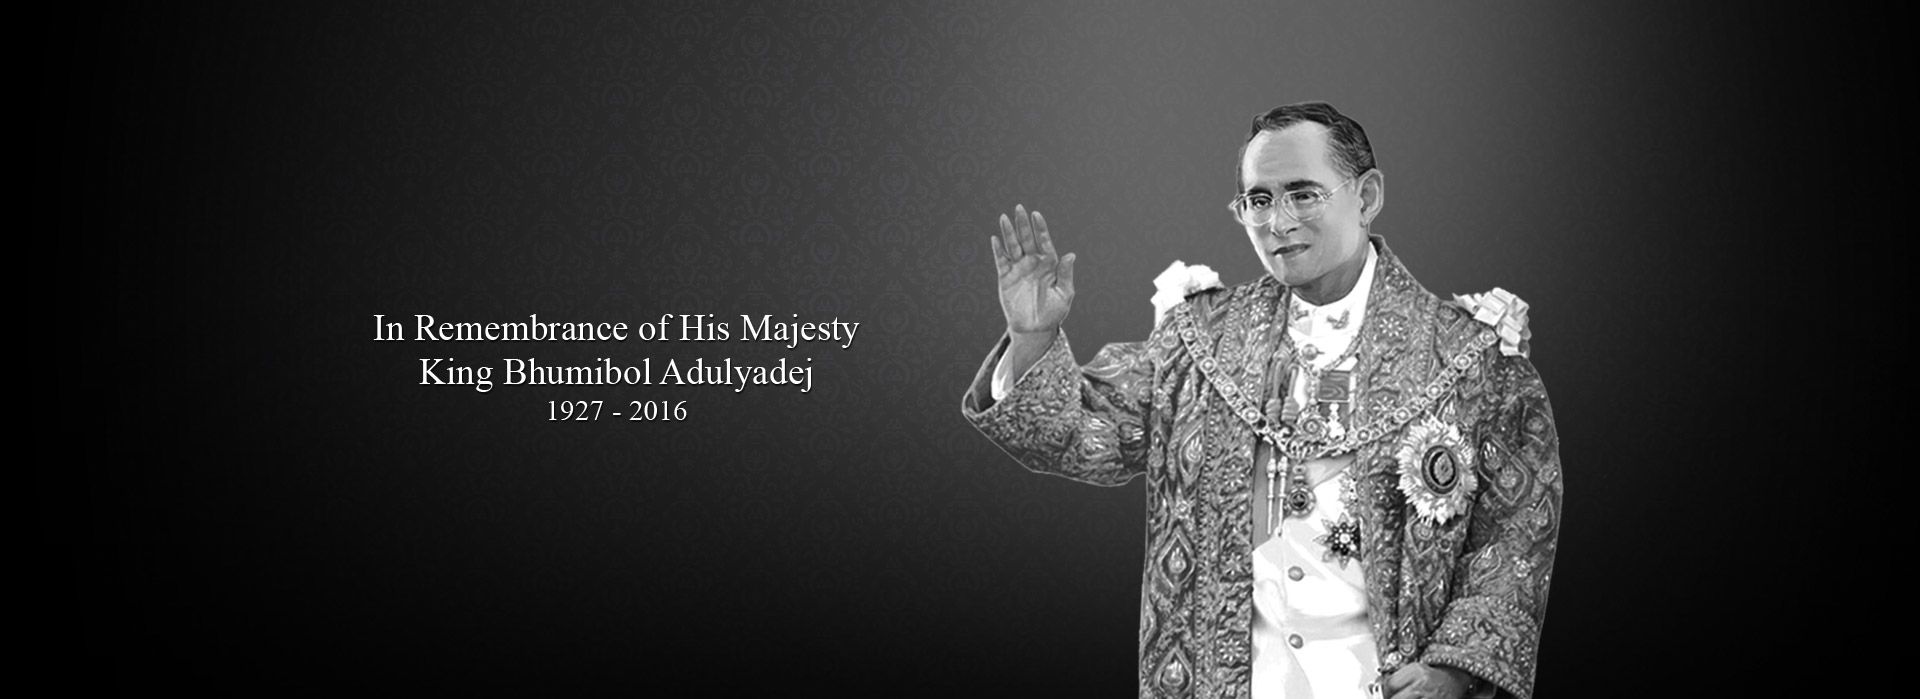 In Remembrance of His Majesty King Bhumibol Adulyadej 1927 - 2016